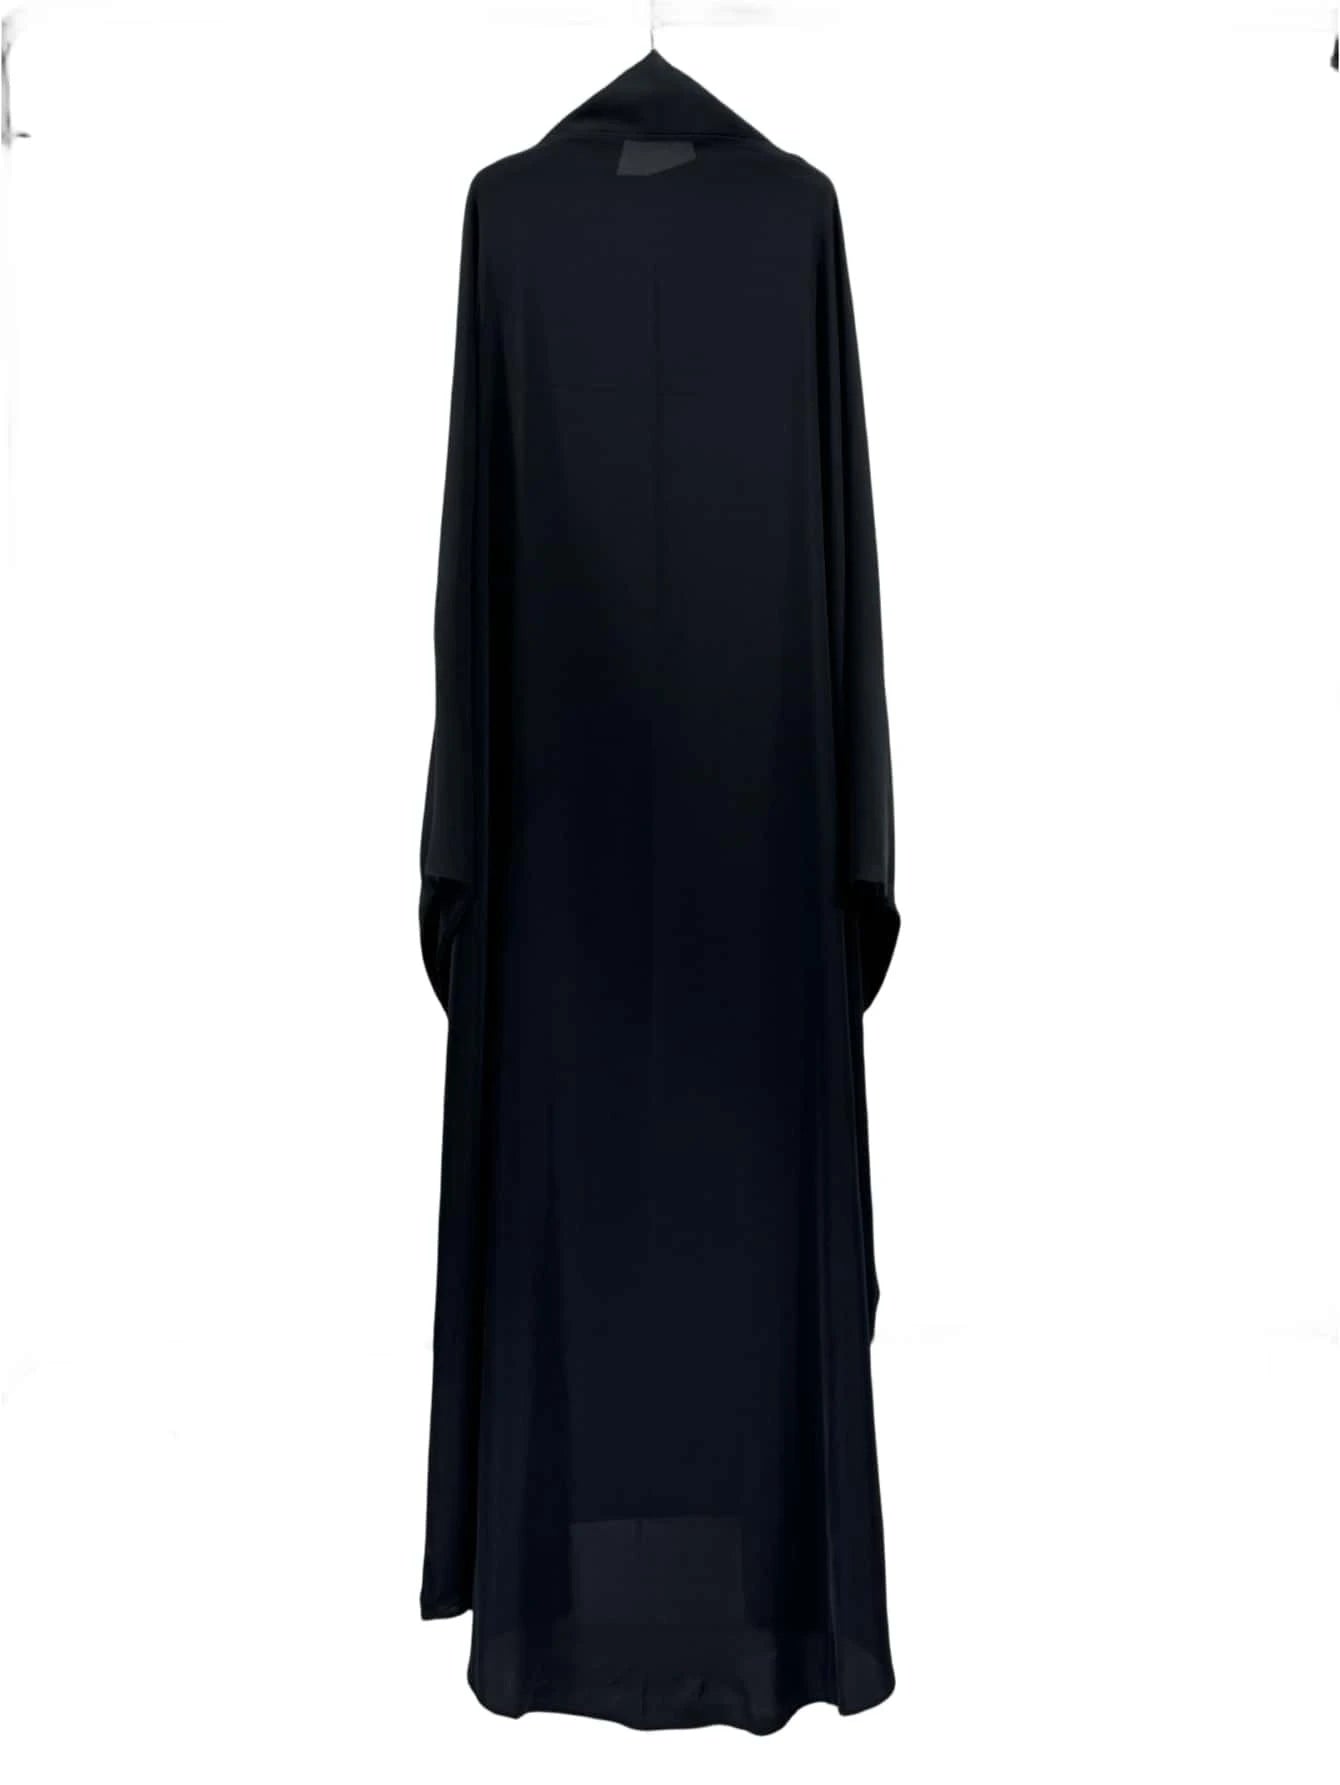 1Pc Women'S Solid Color Extended Hijab for Daily Use Women Abaya Accessories